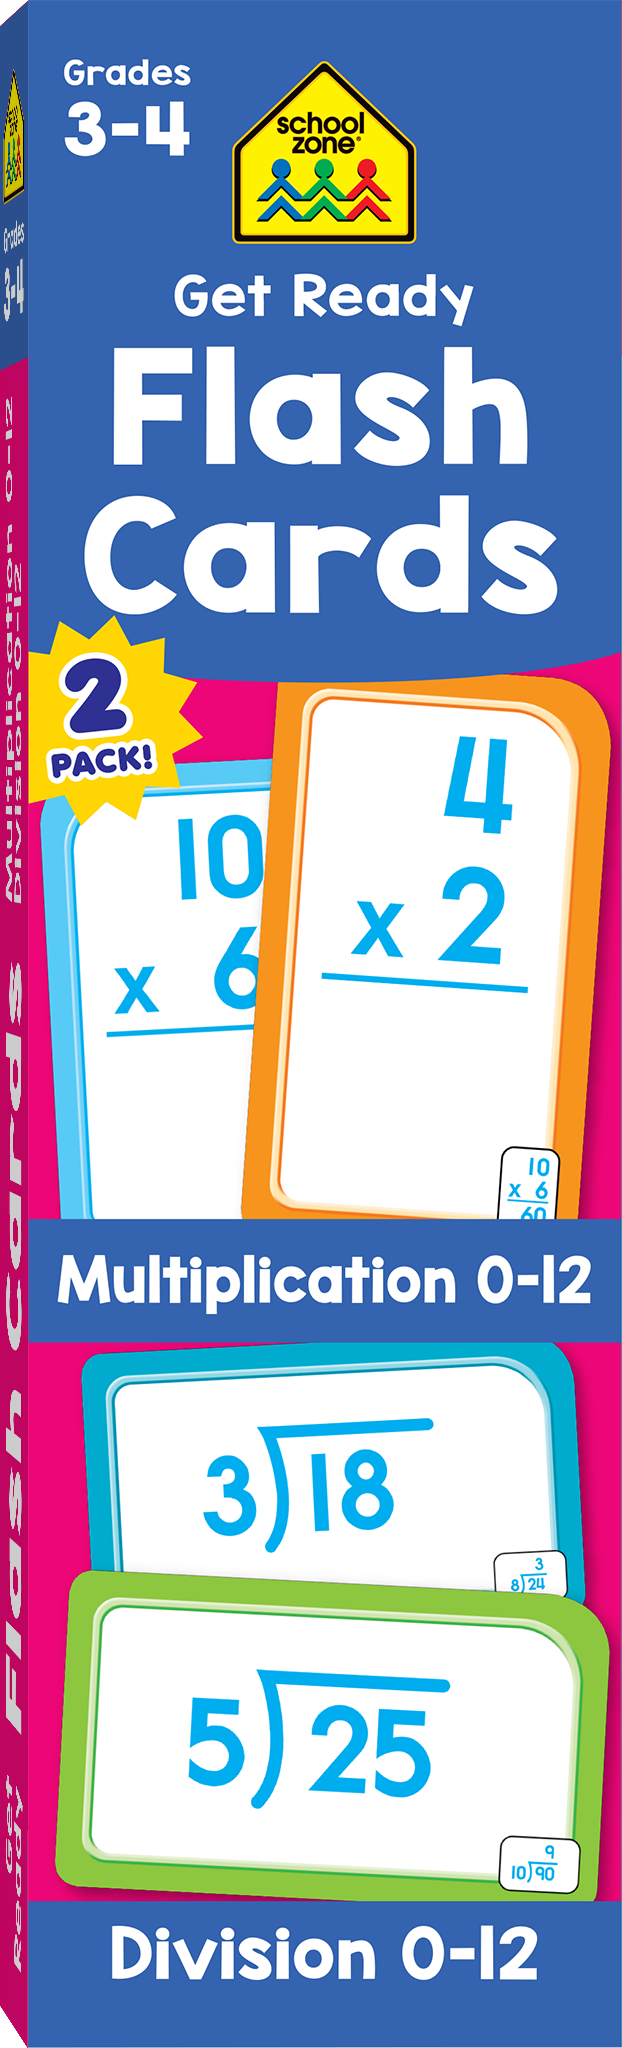 Get Ready Flash Cards Multiplication & Division 2-Pack Grades 3-4 will help kids be ready for the next level!